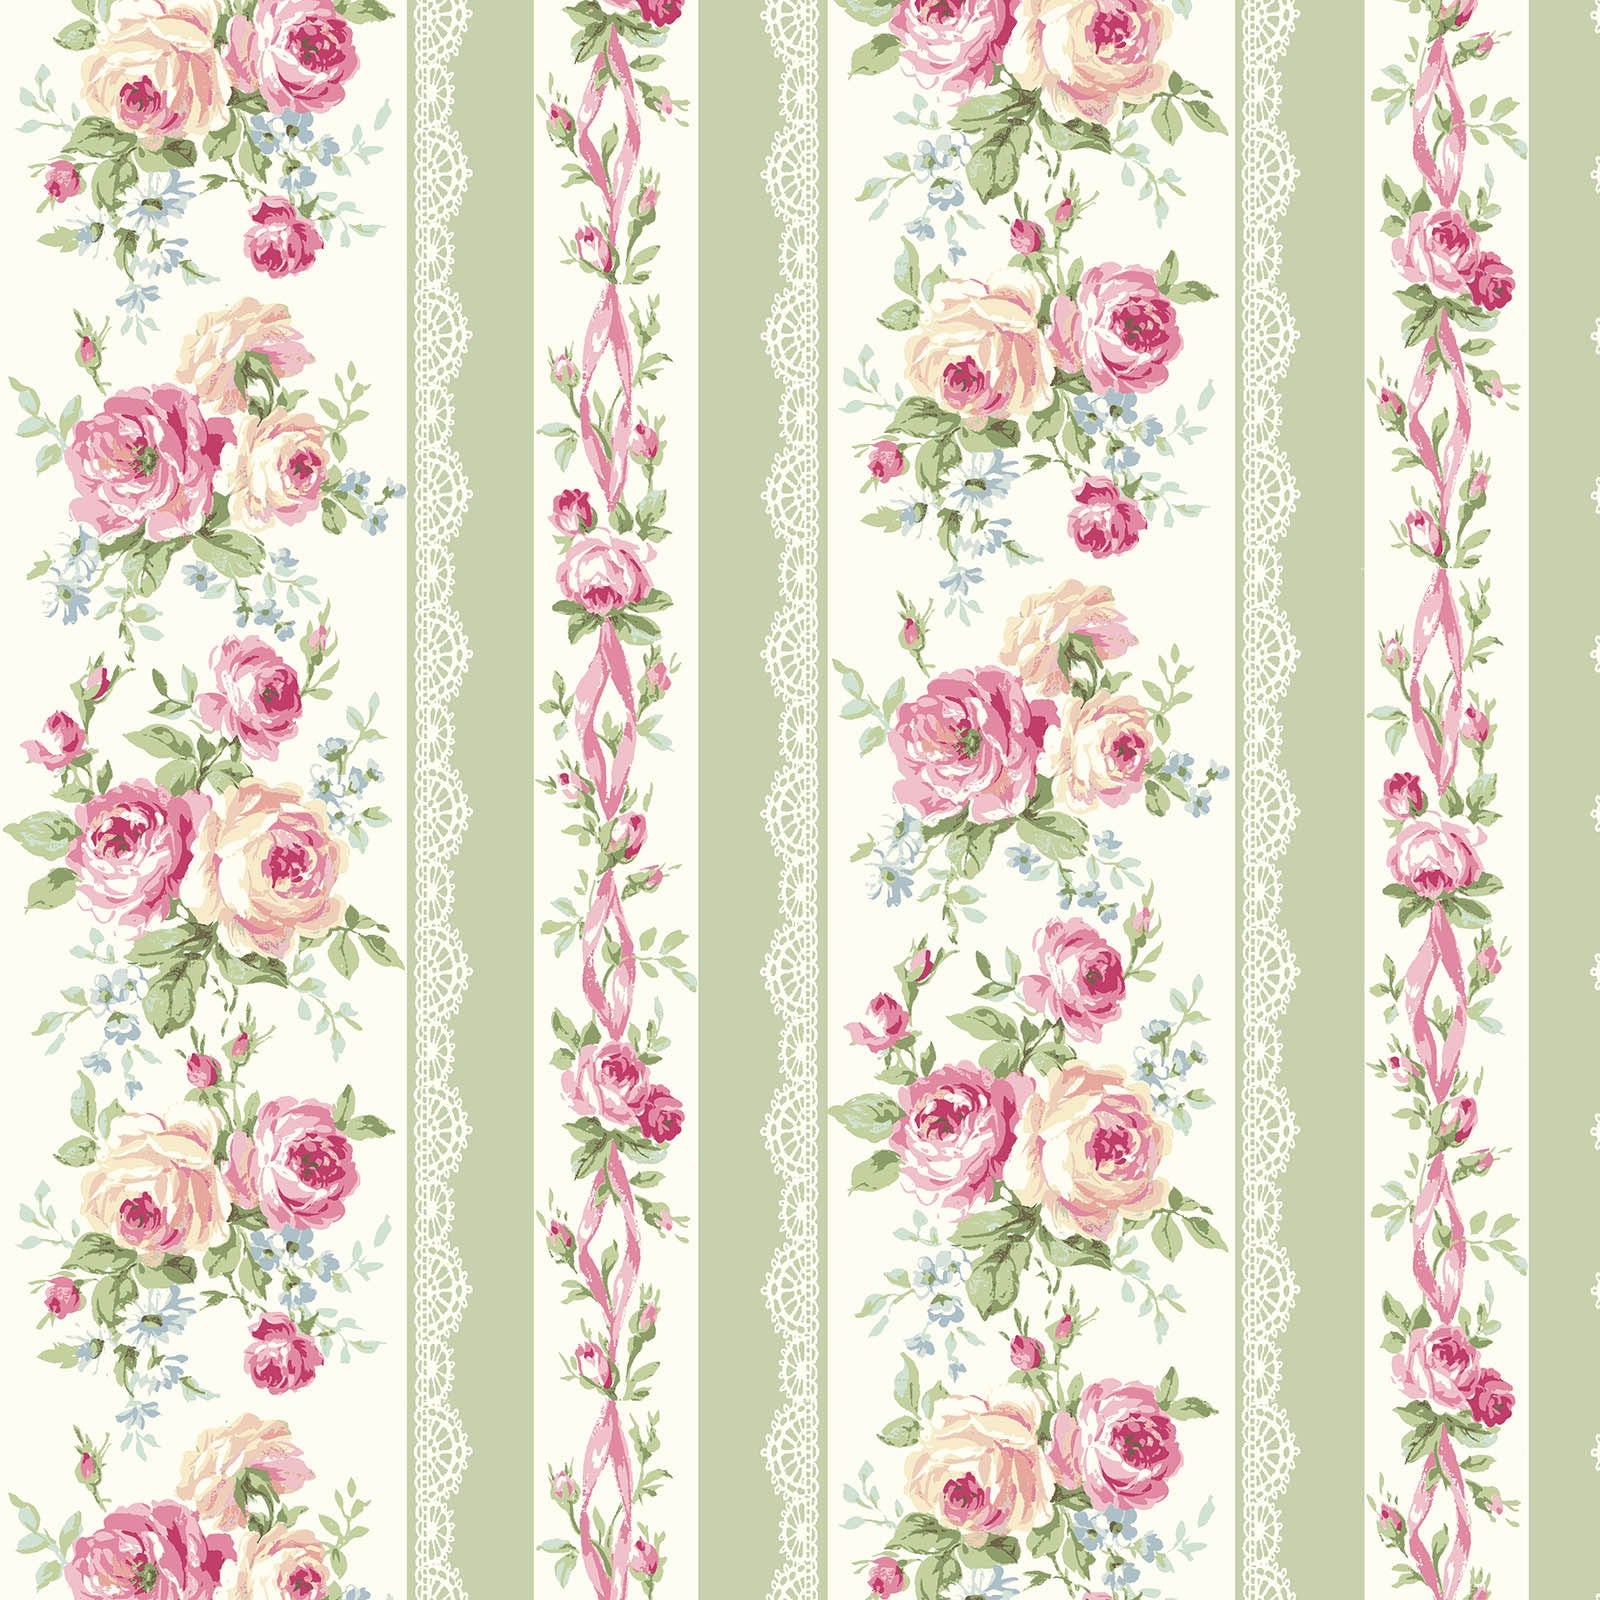 Rose Waltz RuRu Bouquet cotton fabric by Quilt Gate Ru2450-12C Roses and Ribbons on Green